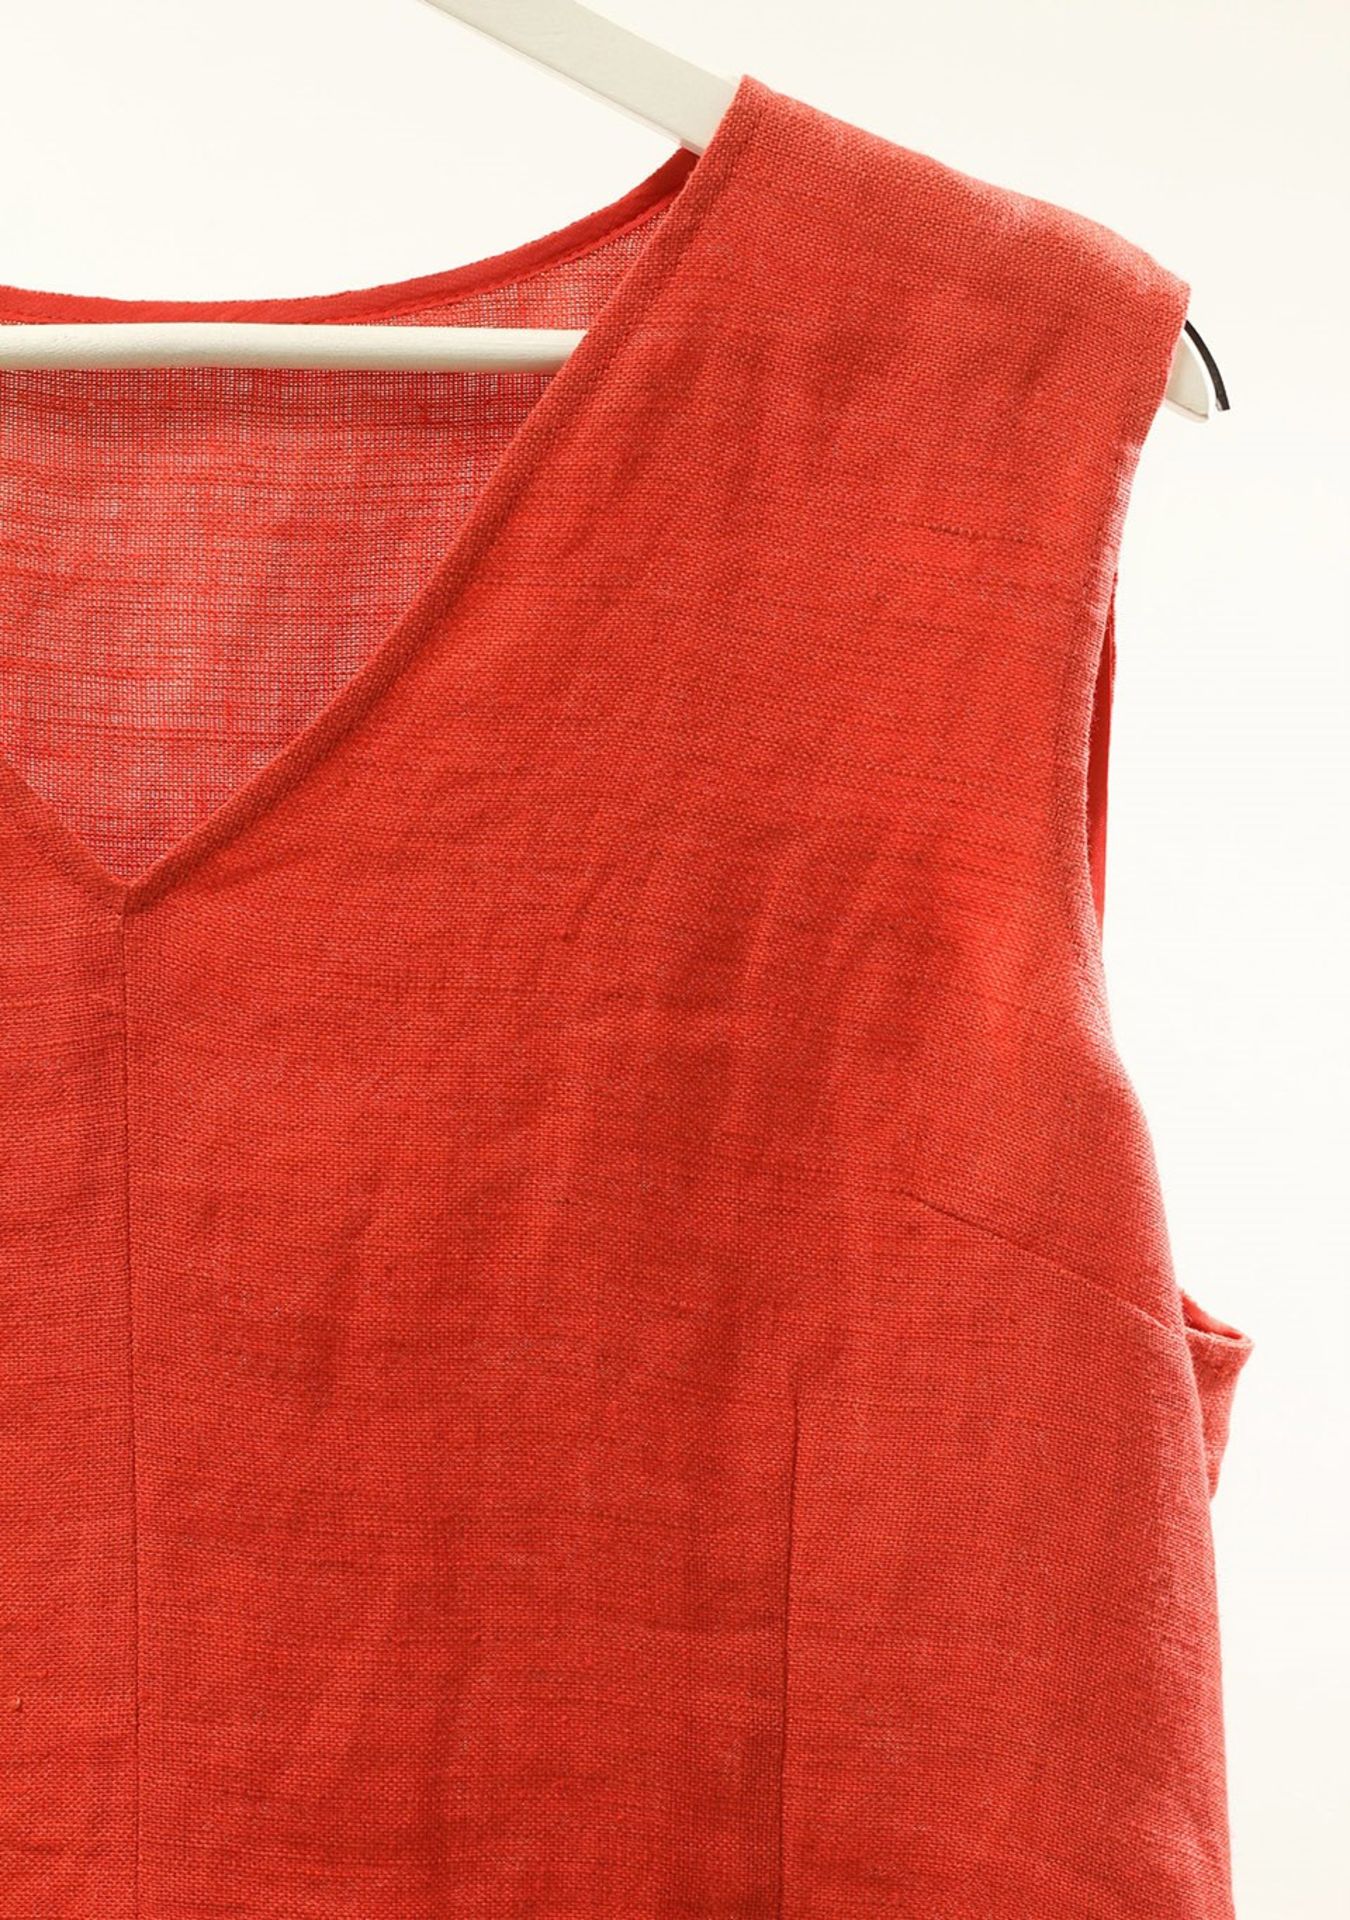 1 x Boutique Le Duc Red Top - From a High End Clothing Boutique In The Netherlands - - Image 2 of 5